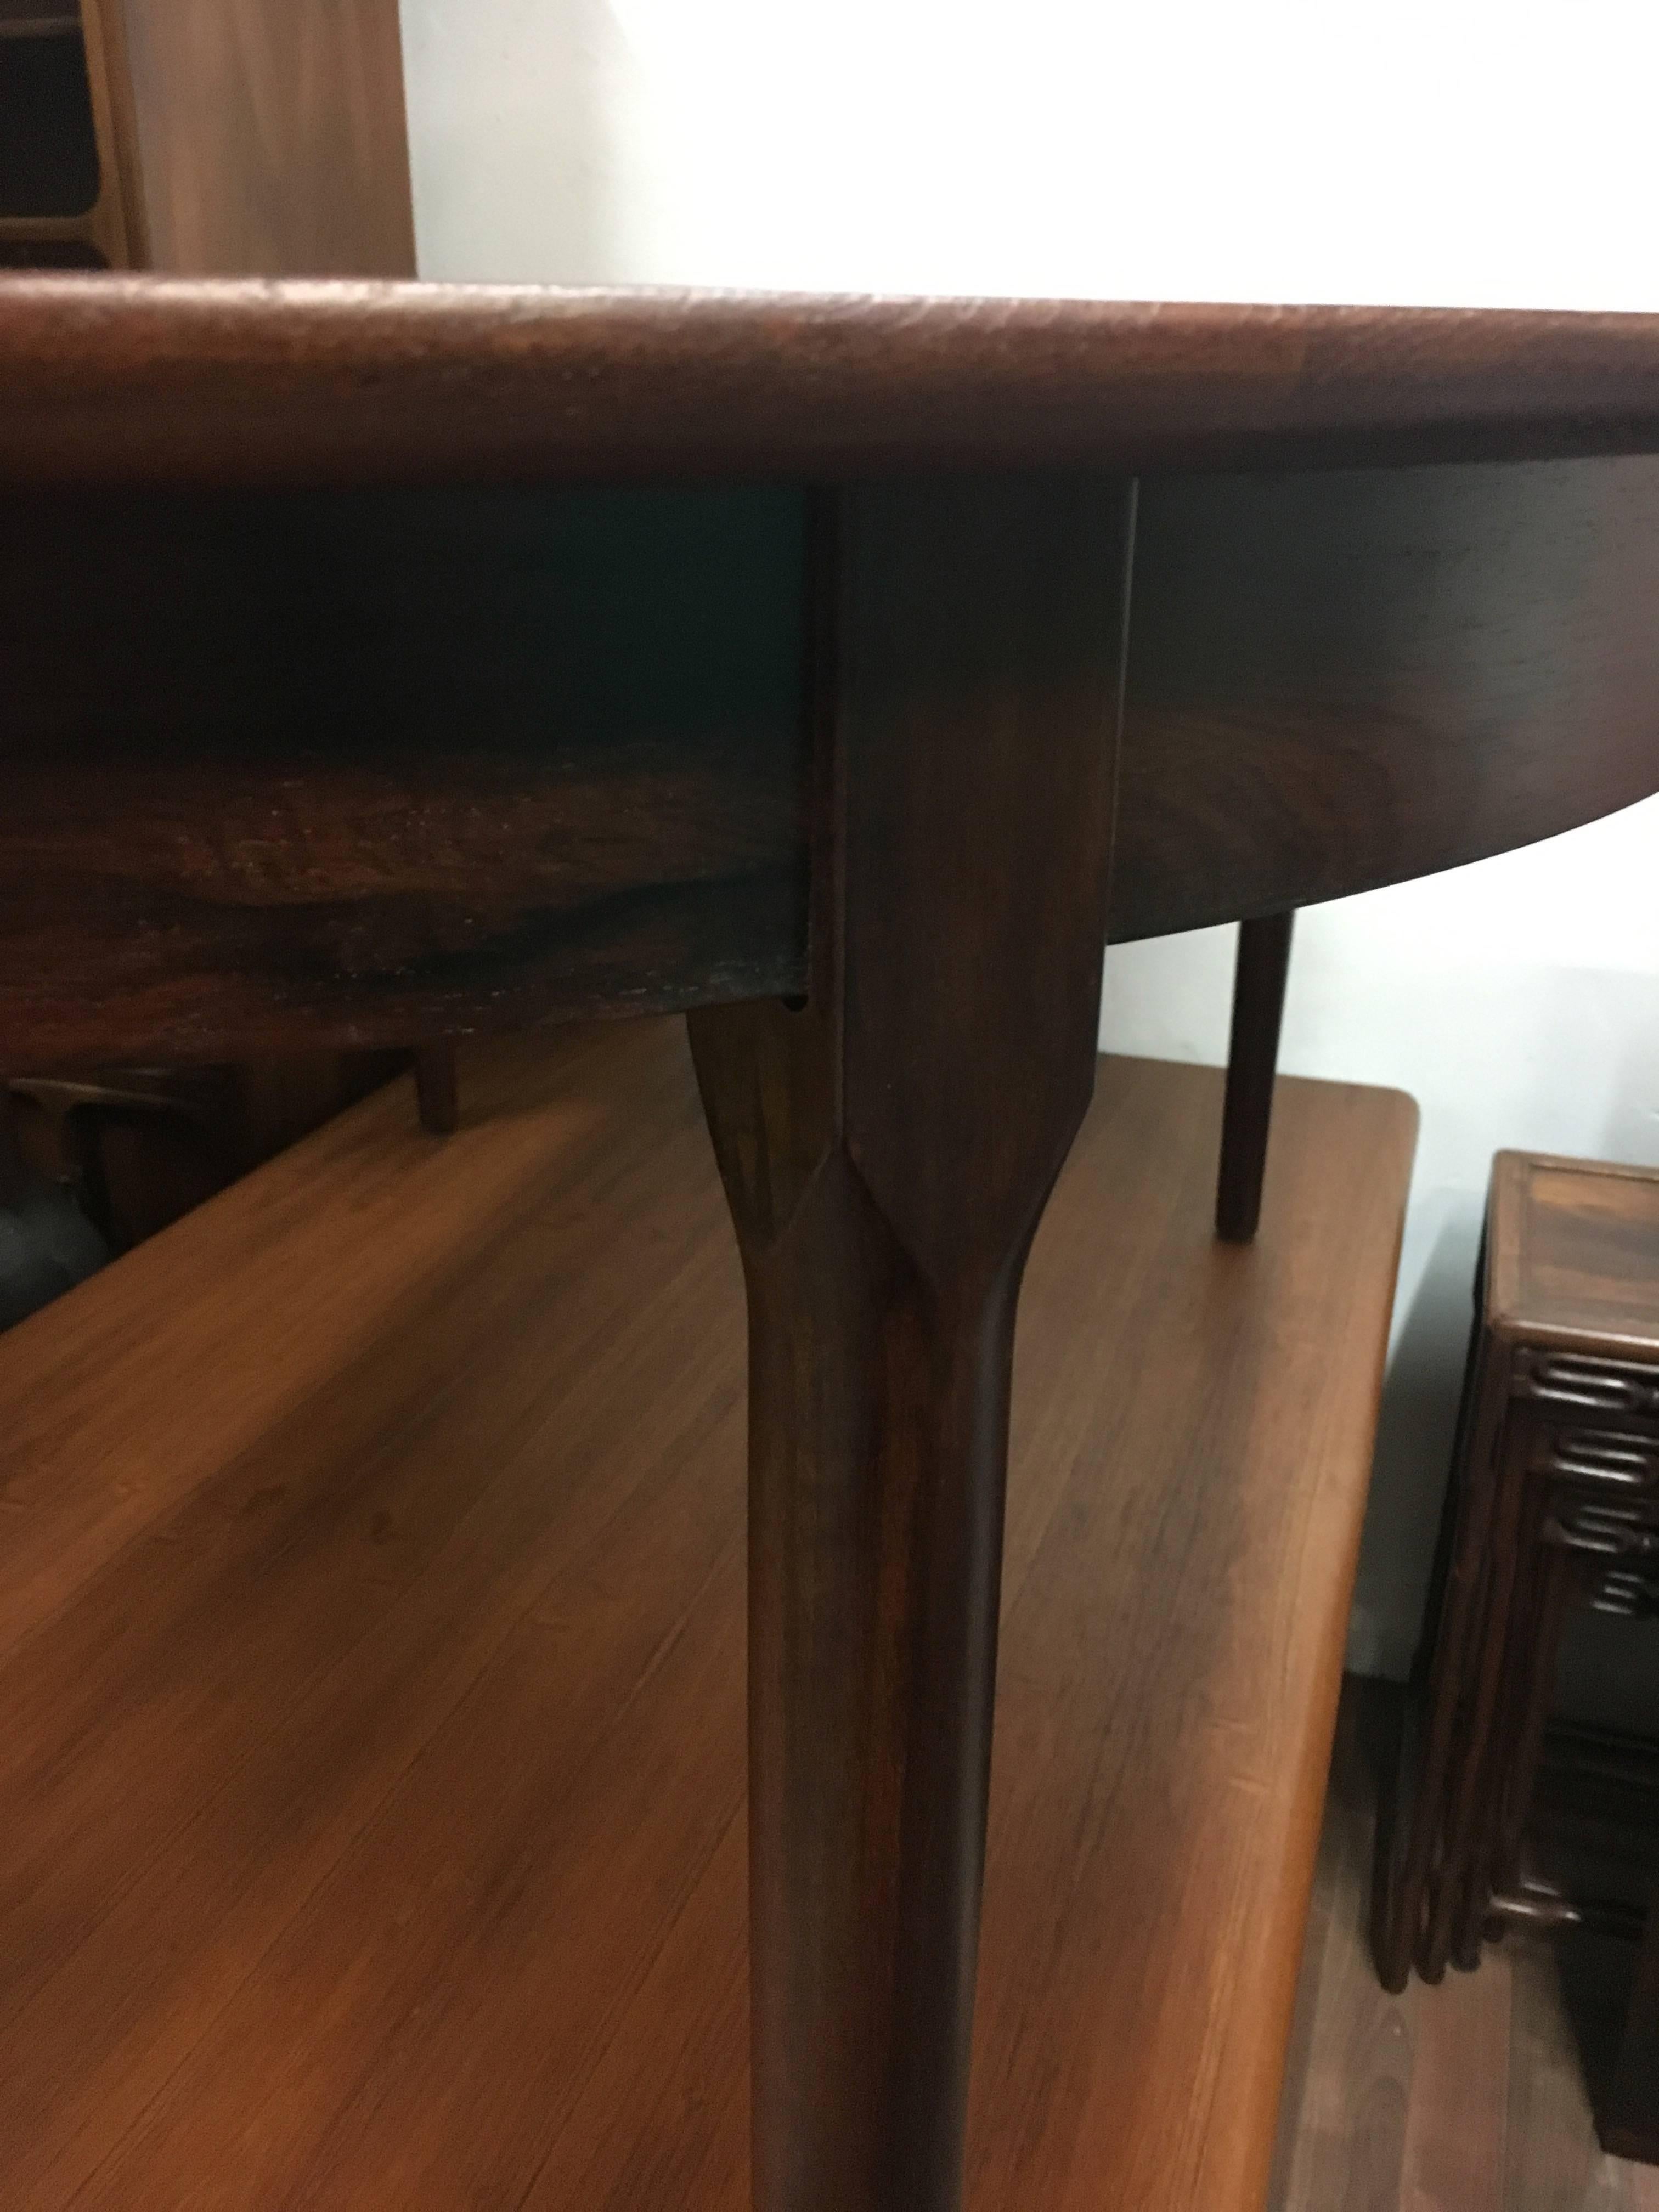 rosewood table